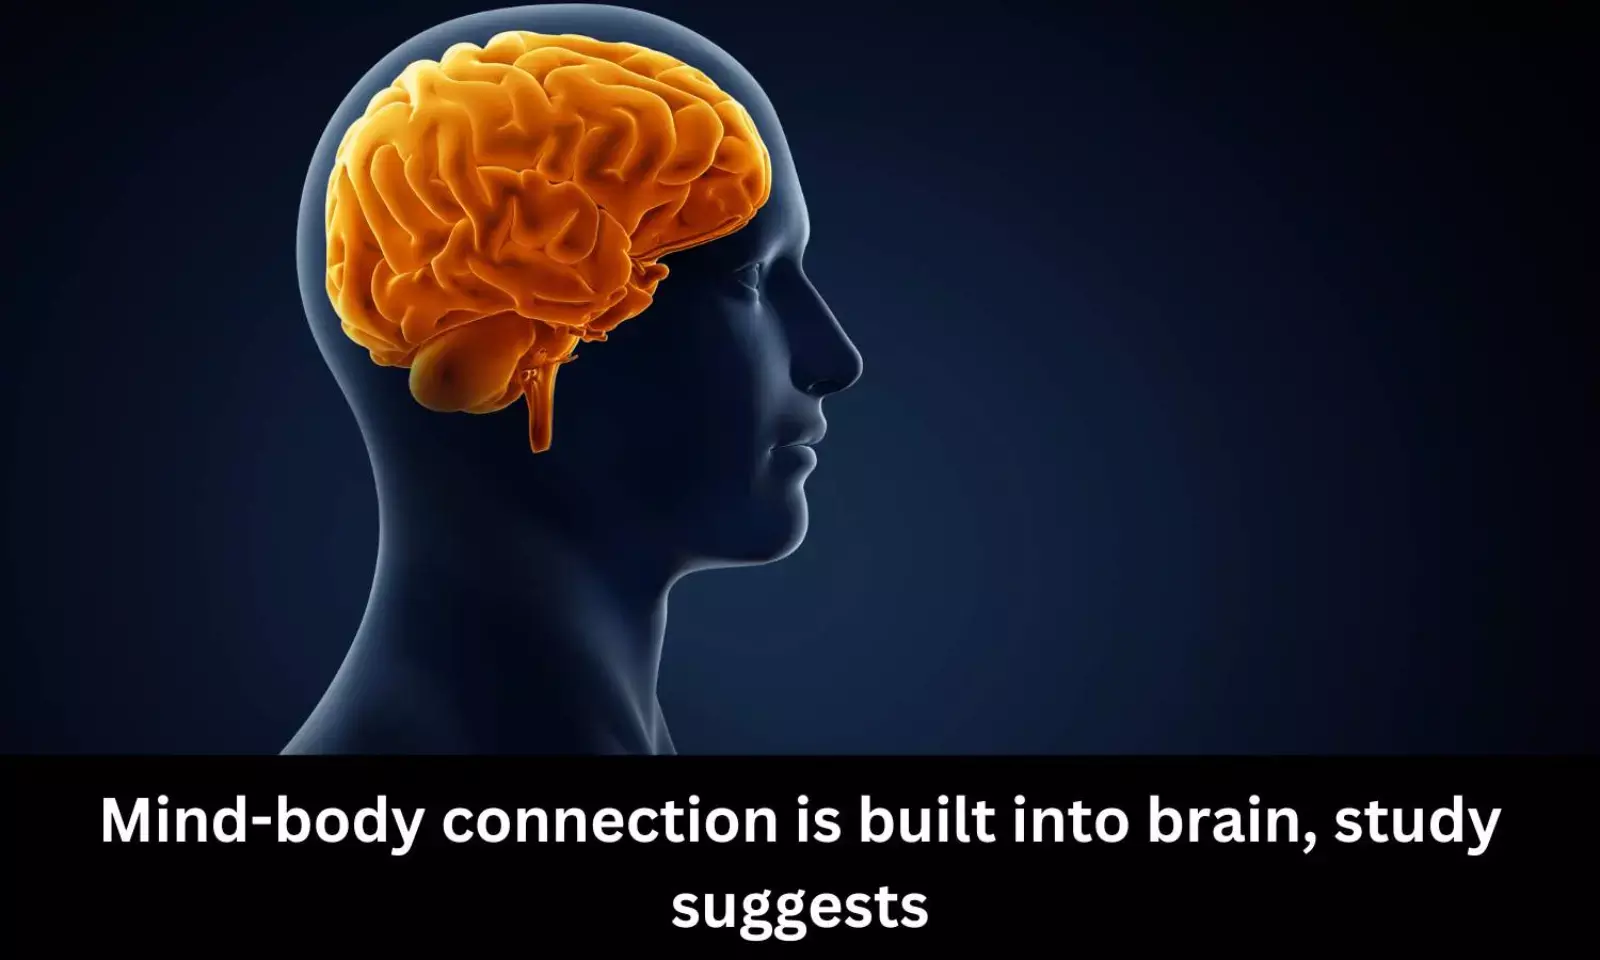 Mind-body connection is built into brain, study suggests